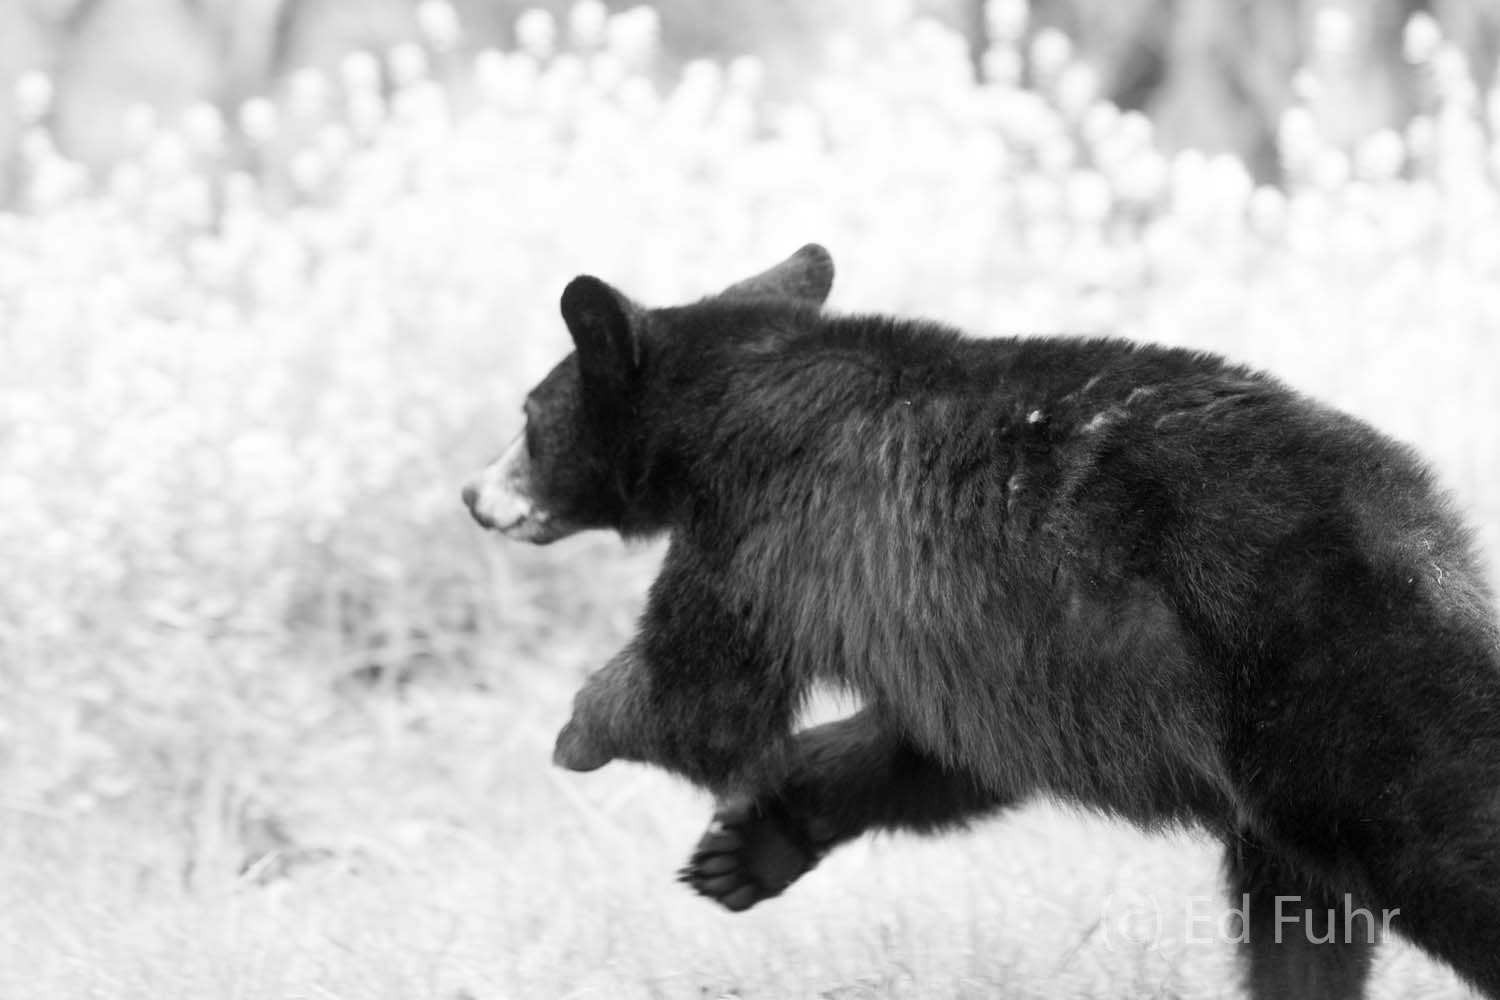 A black bear runs into the safety of the forest's edge.